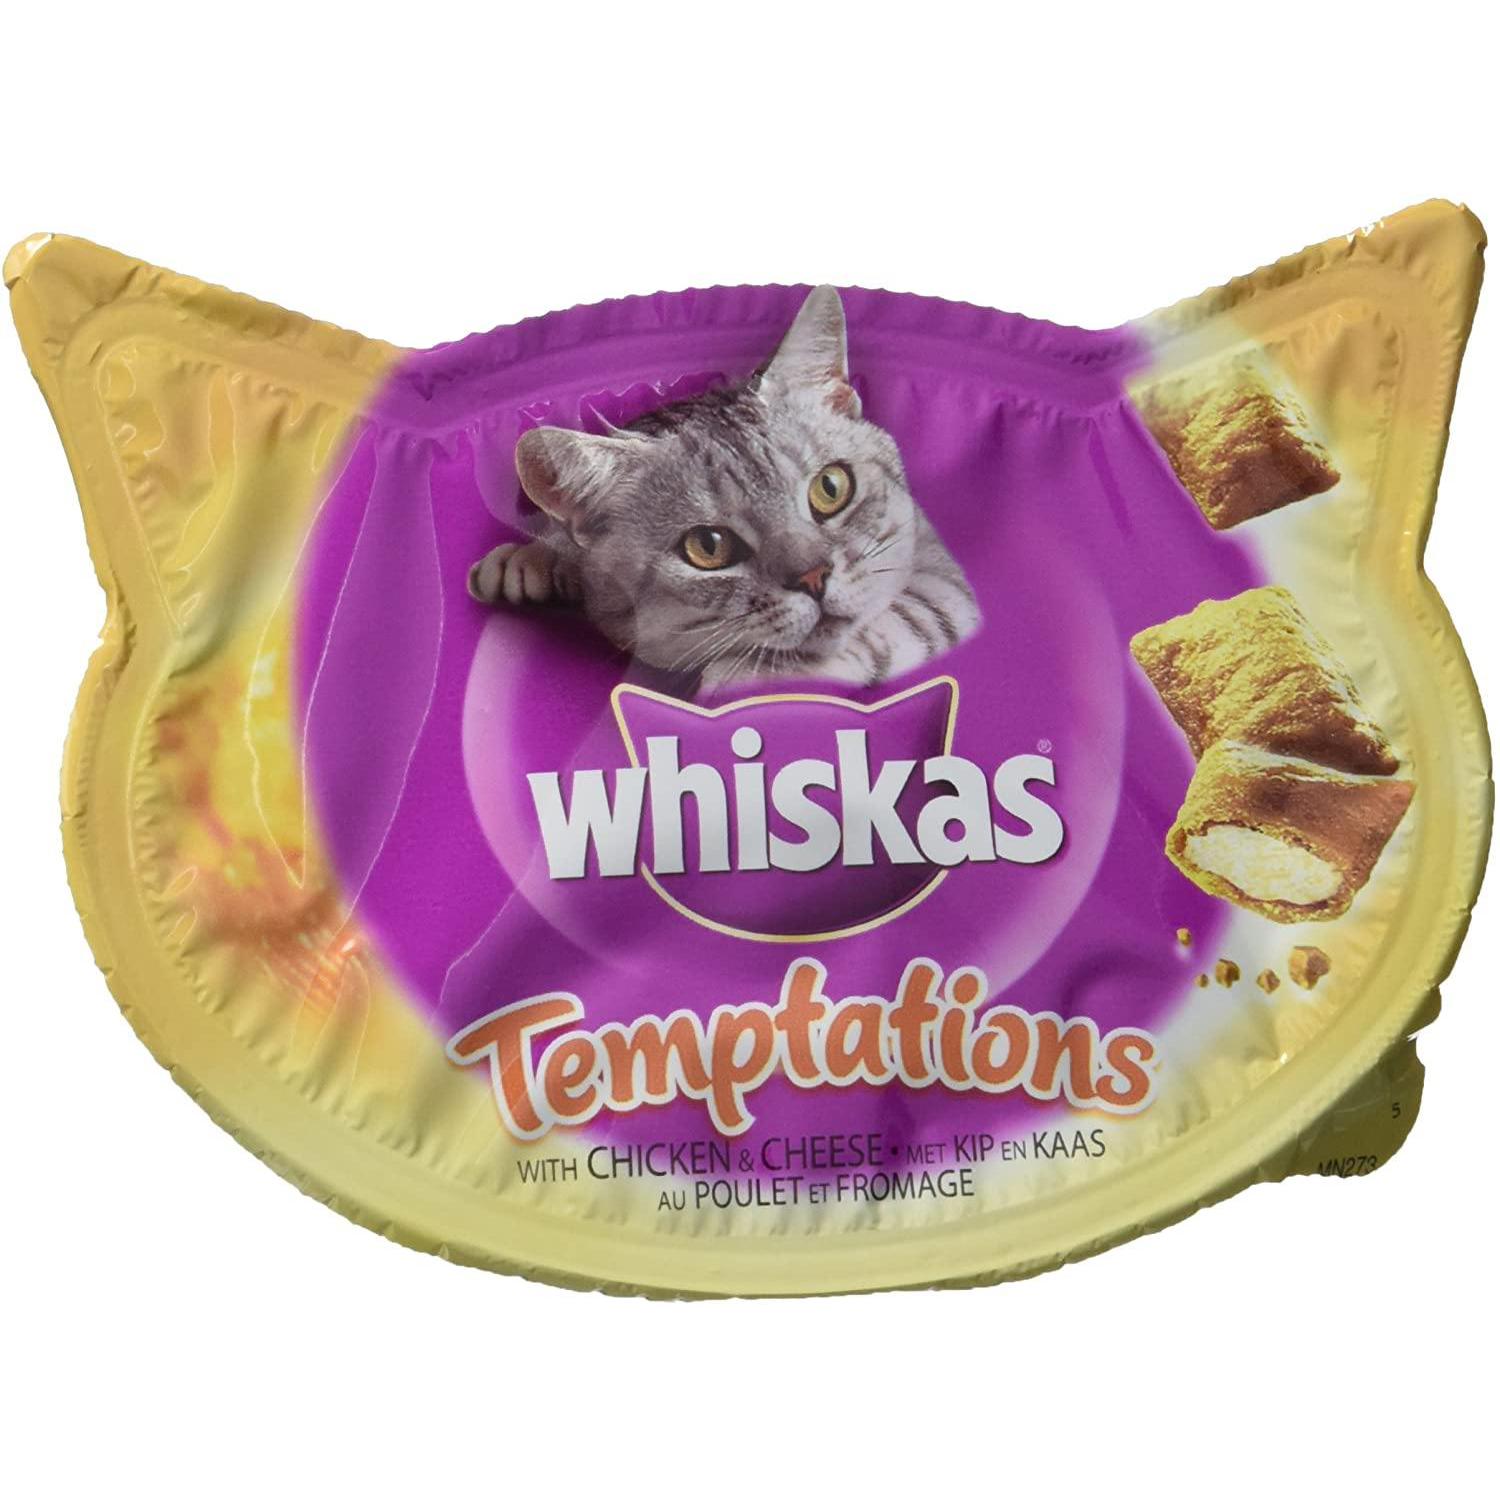 Whiskas Temptations With Chicken e Cheese - 60 gr